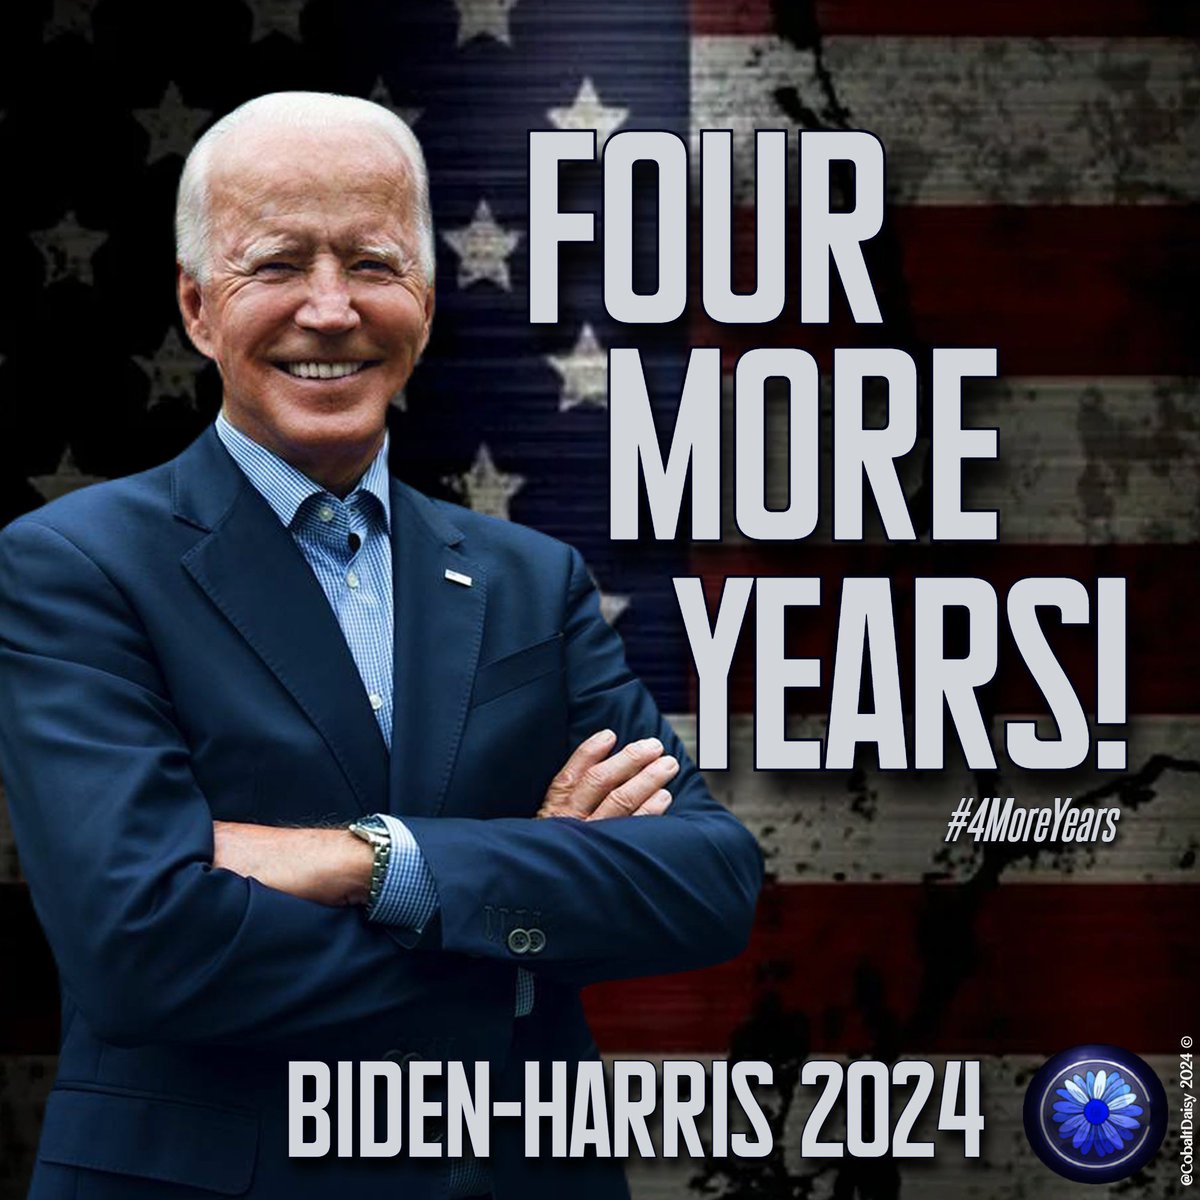 I am giving Biden and Harris four more years to finish what they started! Who's joining me? 🙋🏽🙋🏽‍♀️🙋🏽‍♂️